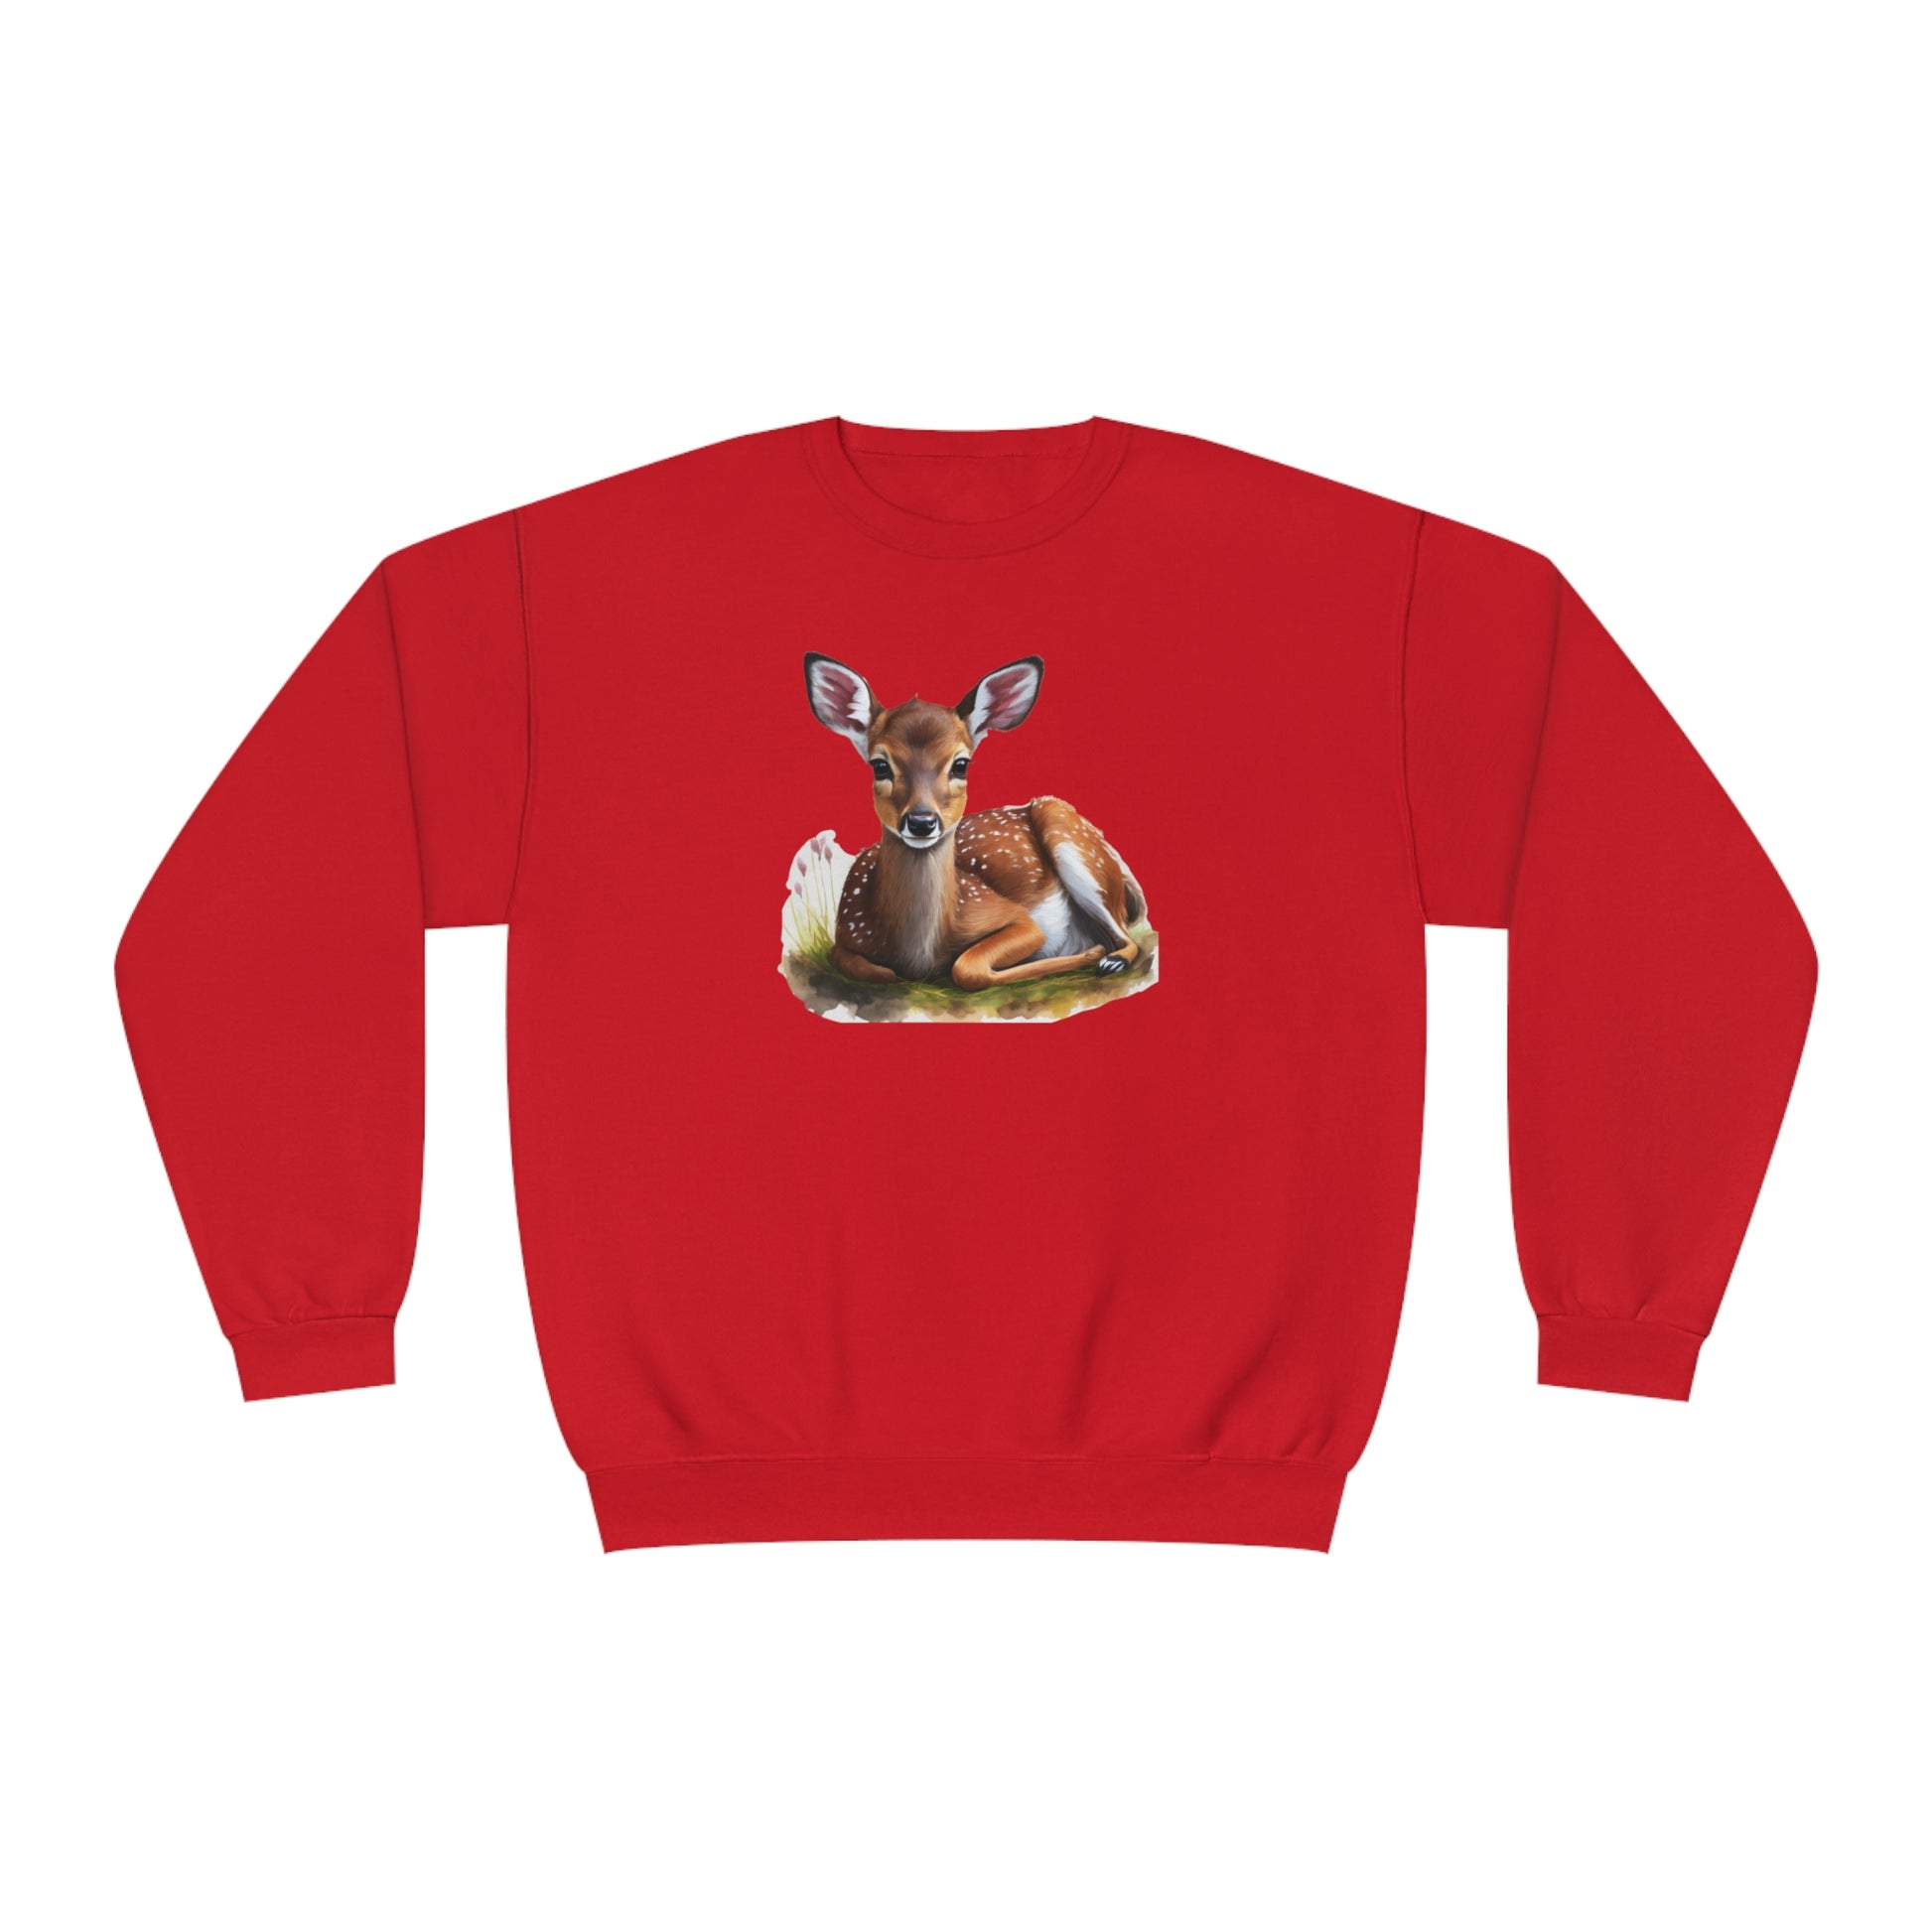 nature inspired sweatshirt with a tranquil deer lying in the woods on a red sweatshirt. made in USA